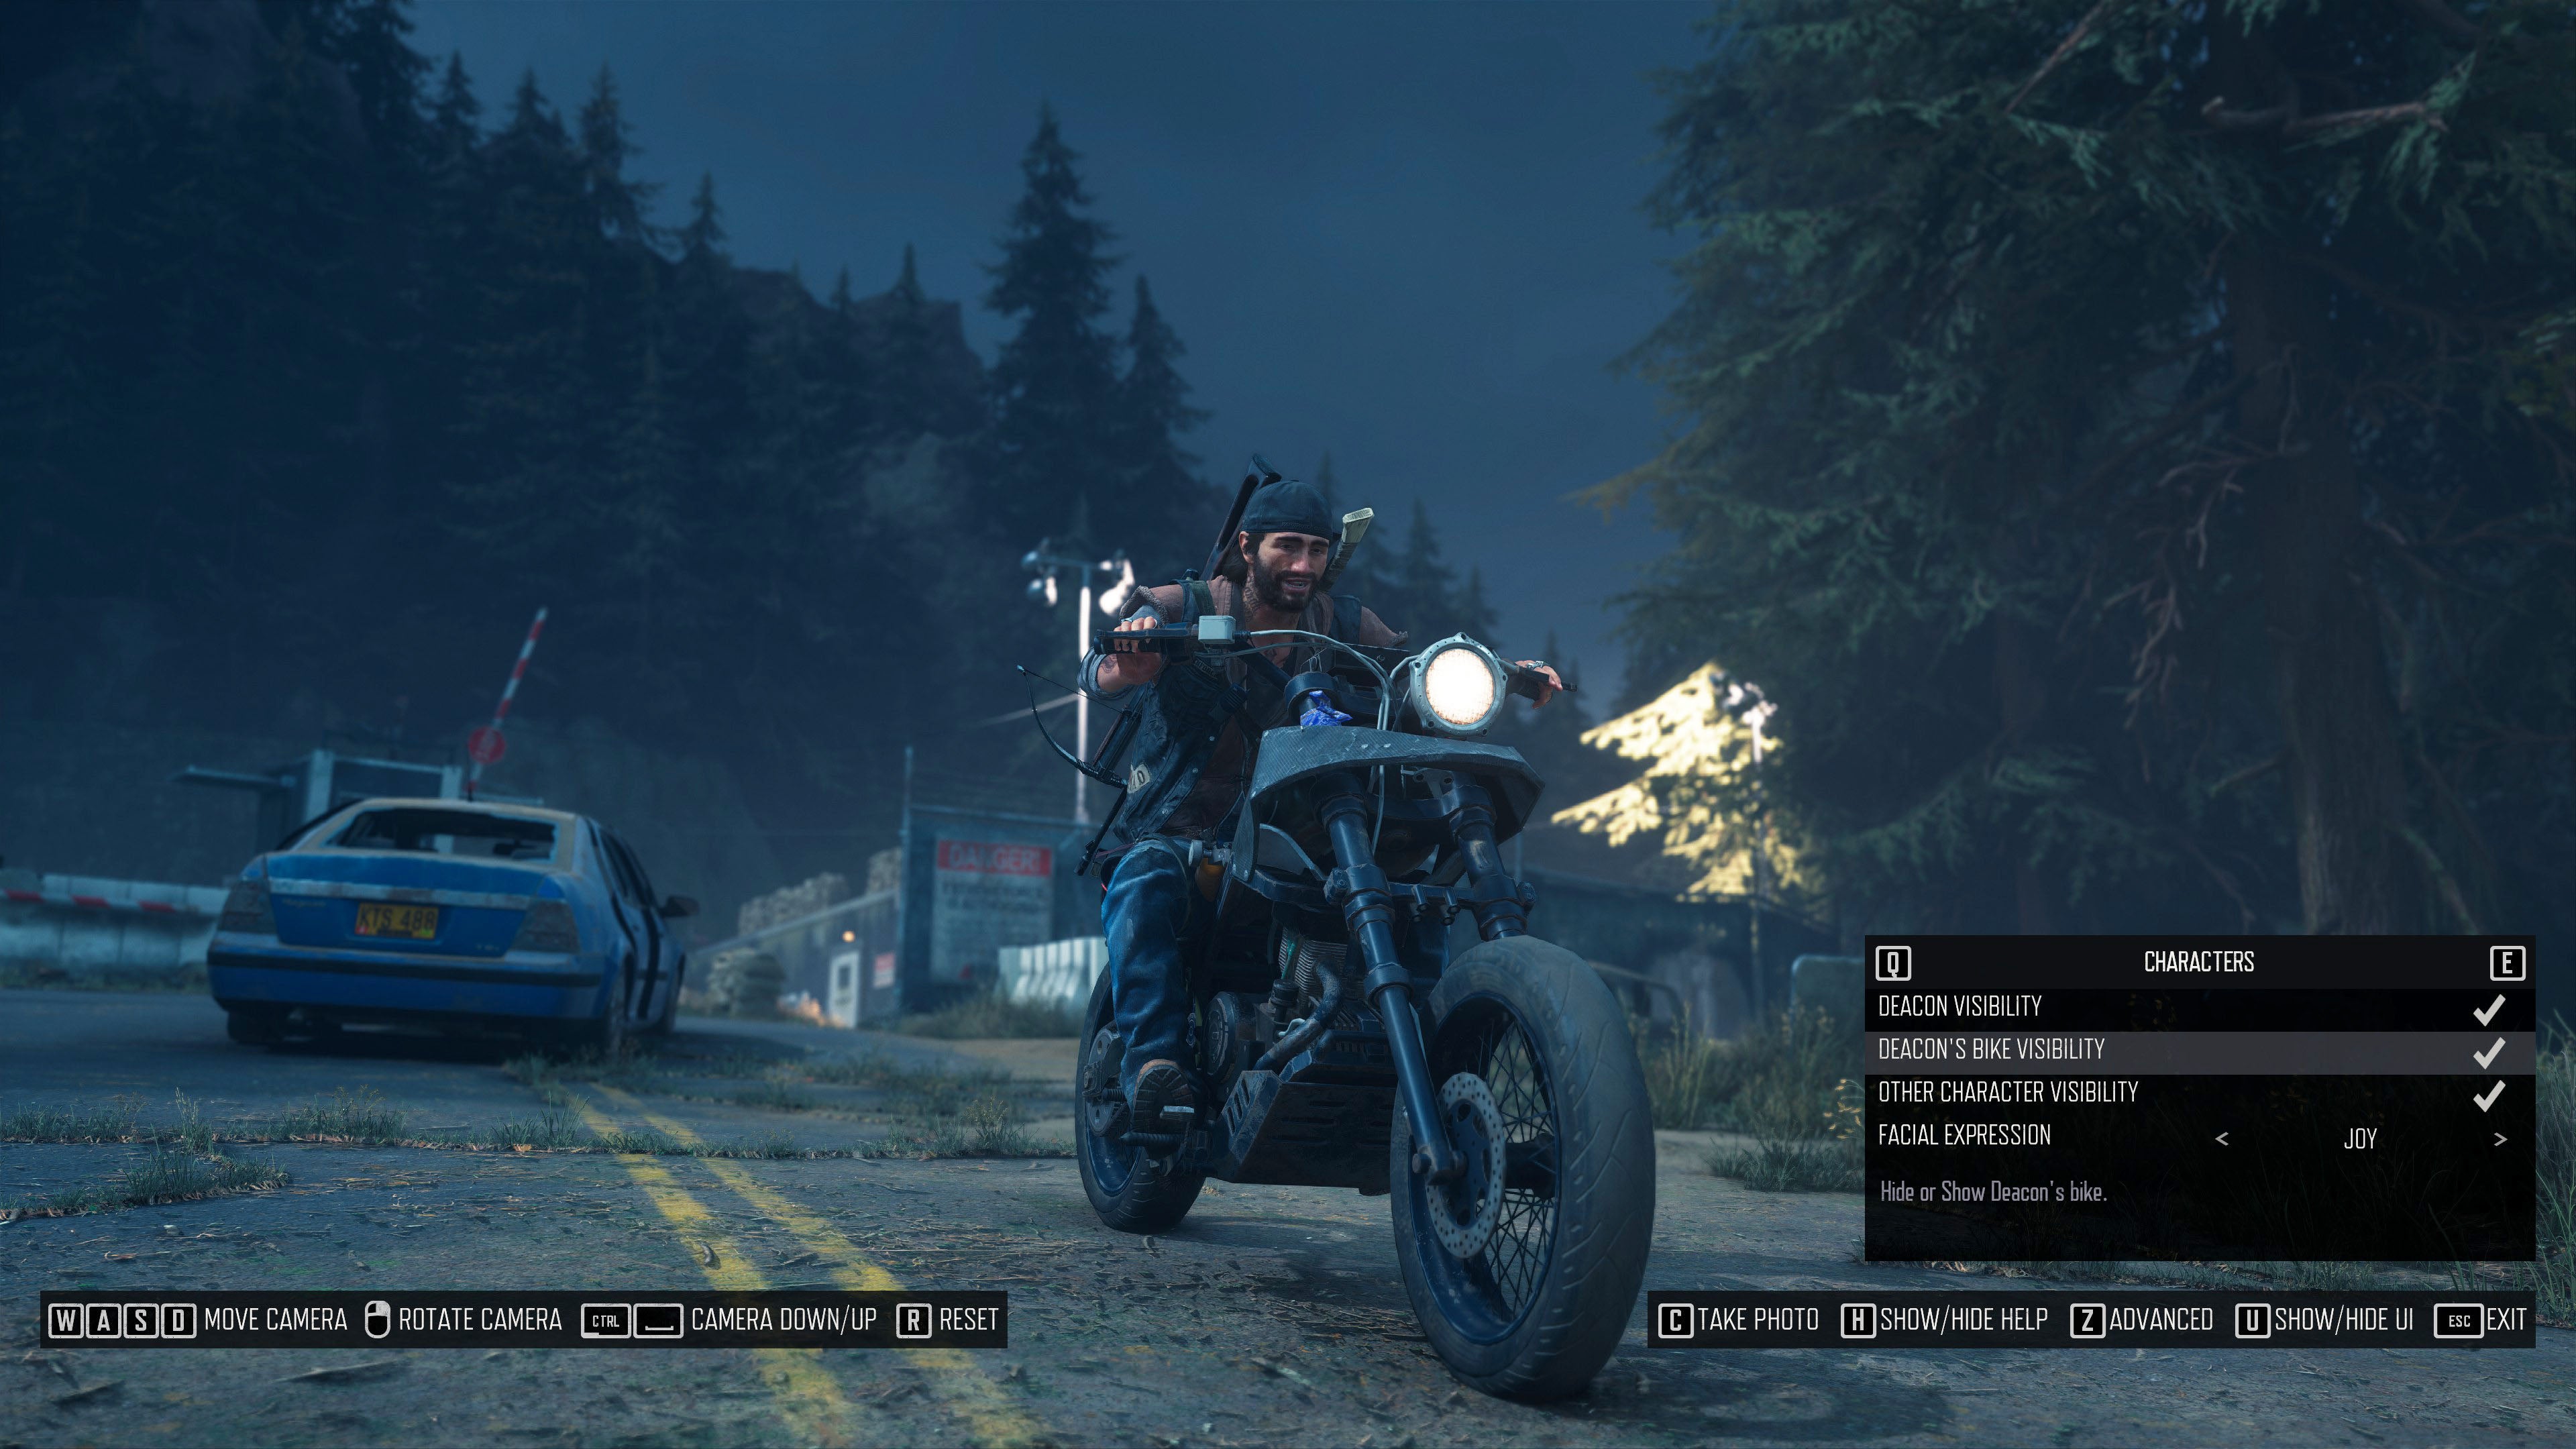 A screenshot of Days Gone's photo mode showing Deacon's bike visibility enabled